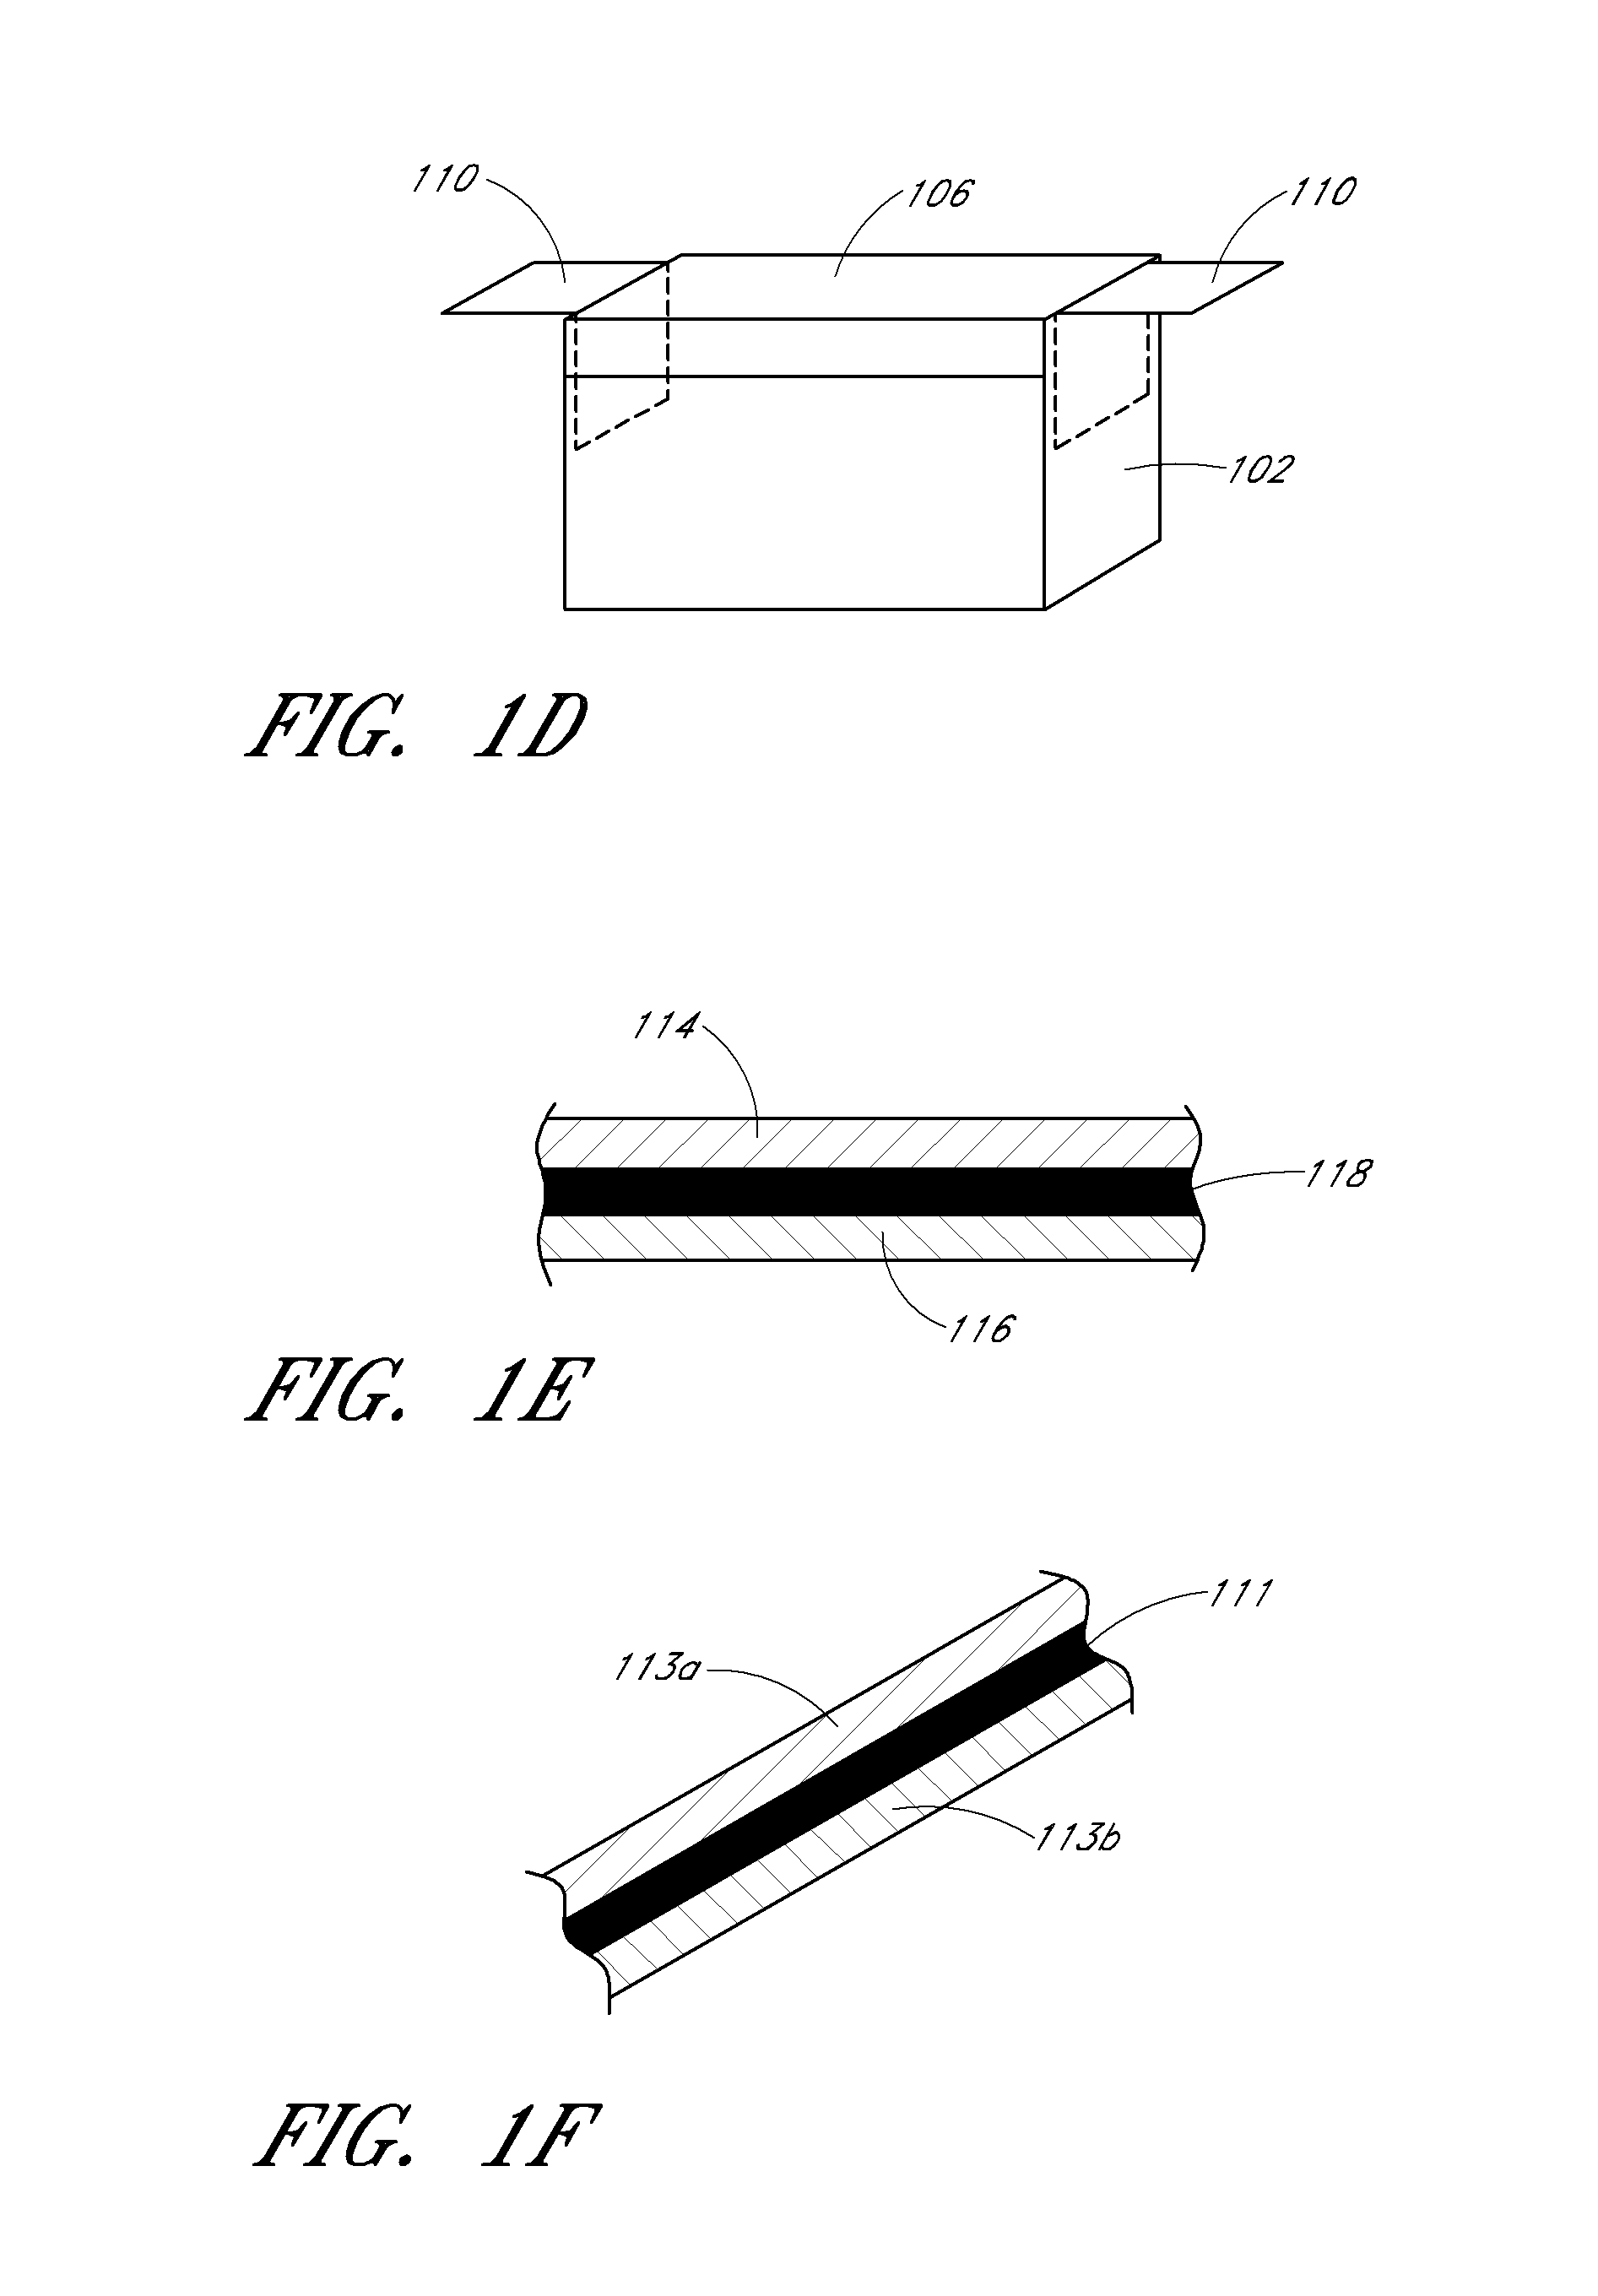 Configurable shielded enclosure with signal transfer element